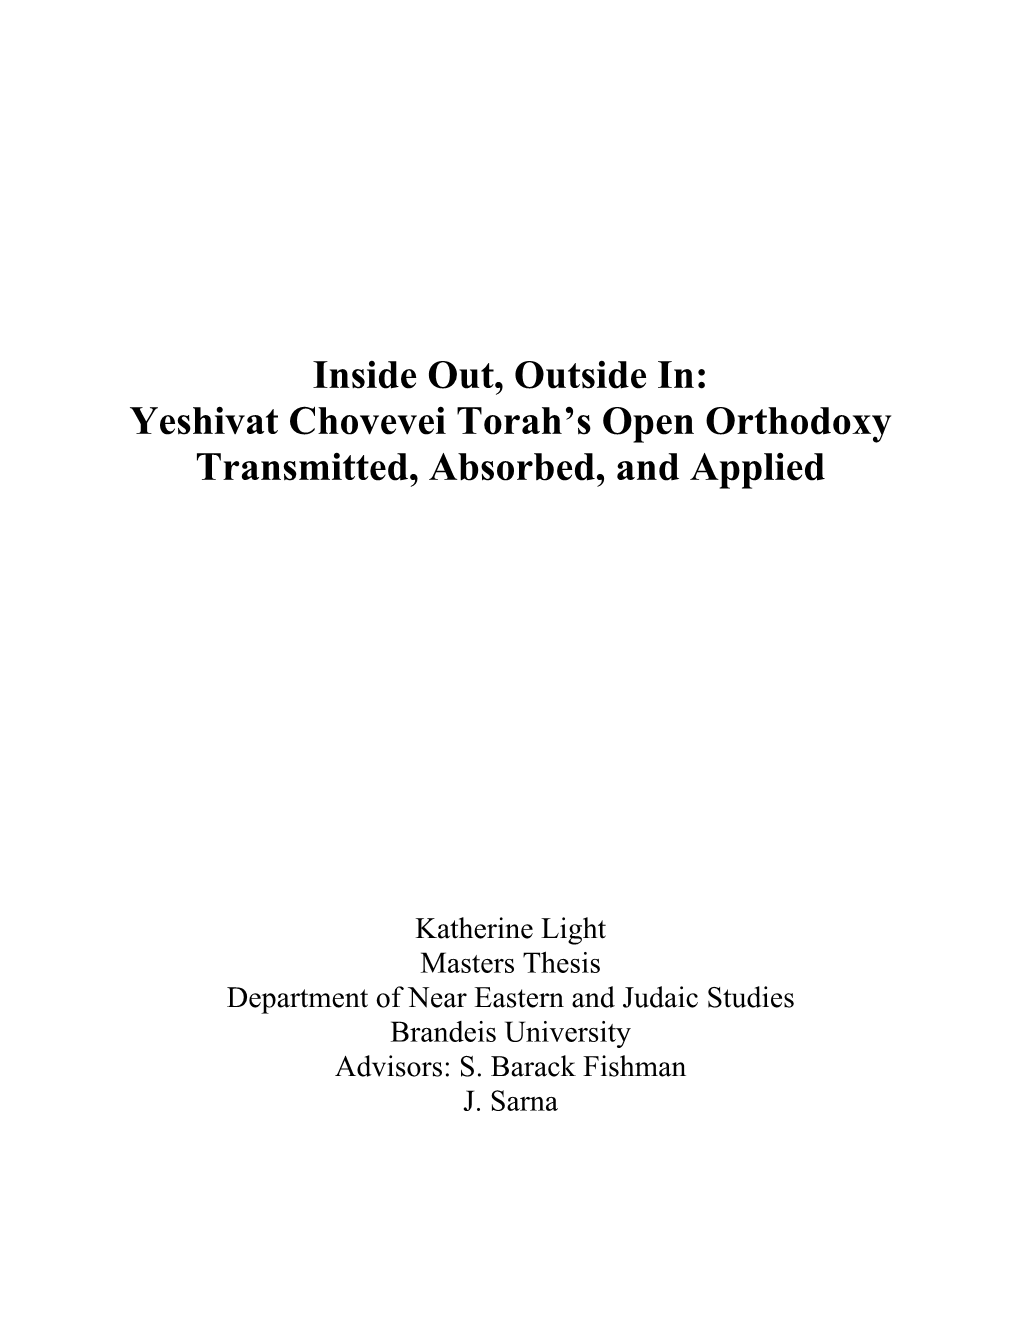 Inside Out, Outside In: Yeshivat Chovevei Torah's Open Orthodoxy